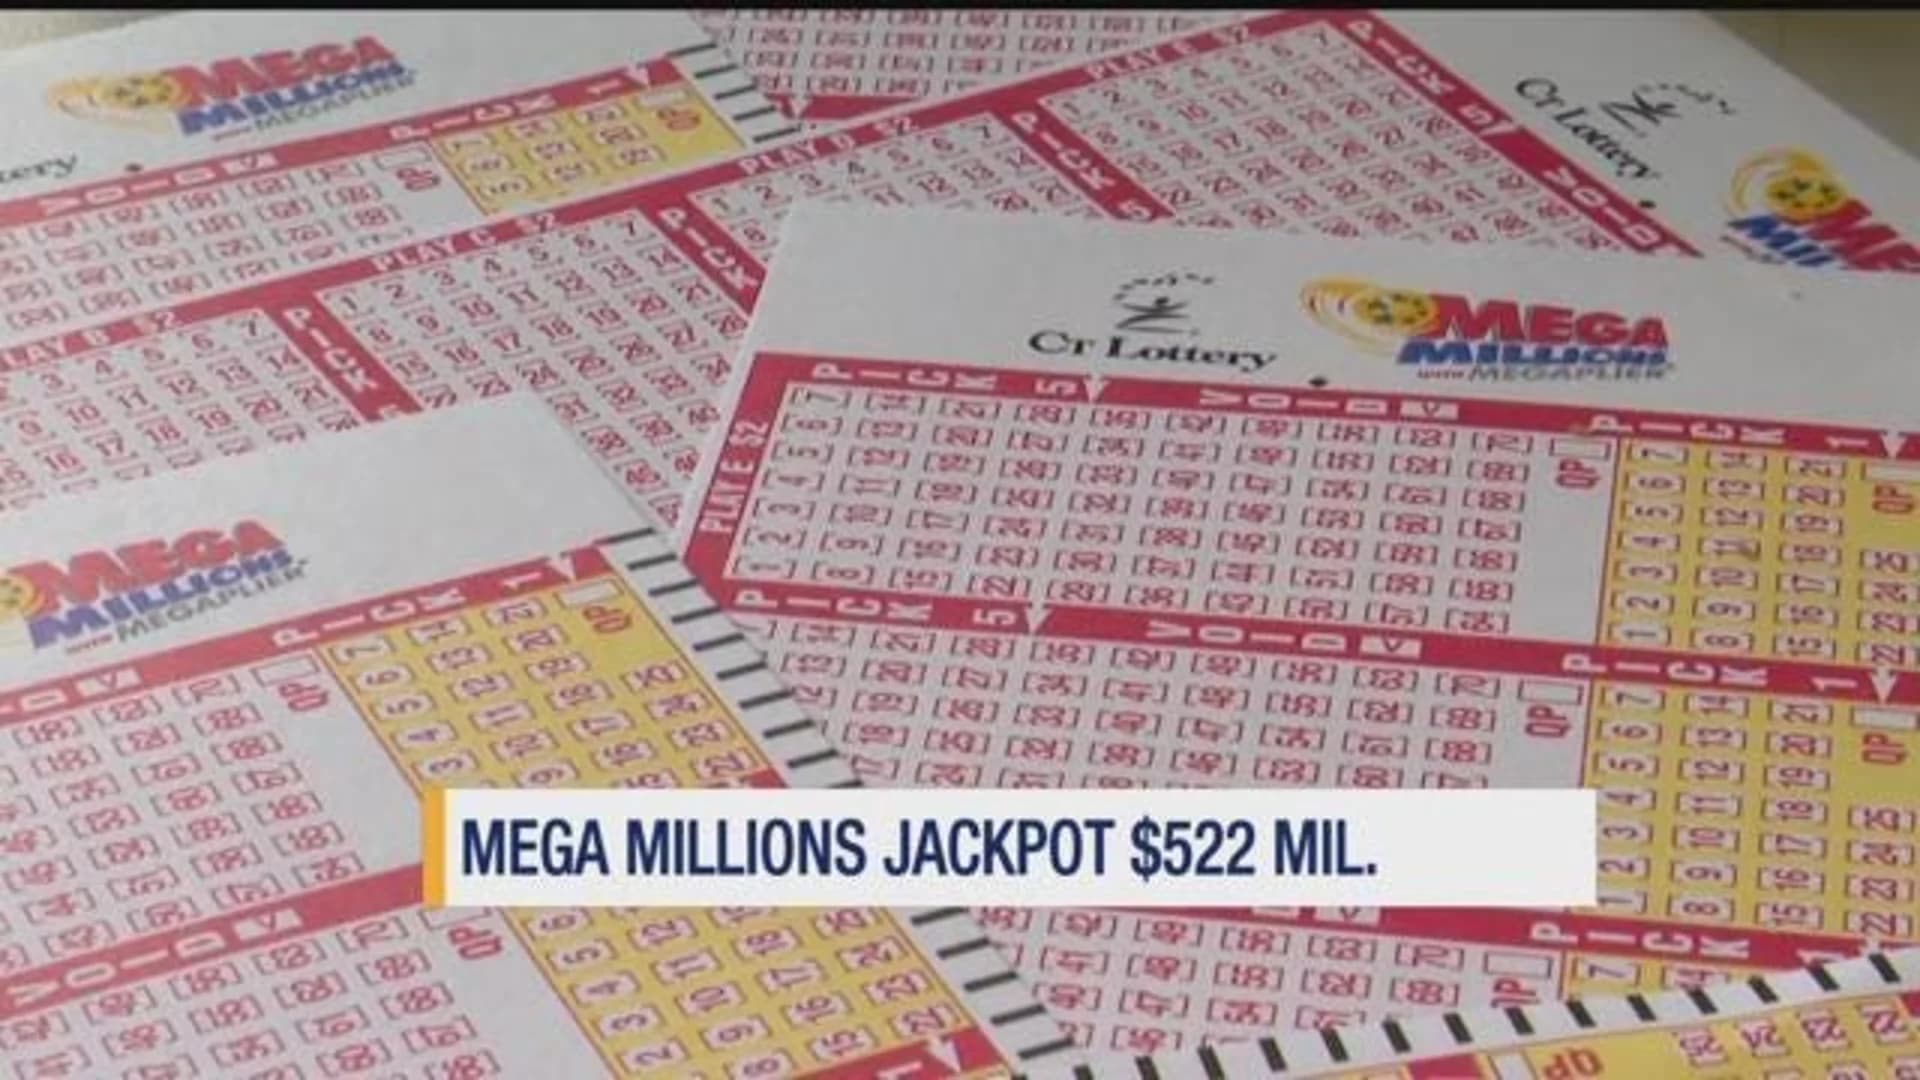 Lotto lovers race out for tickets ahead of $522M drawing